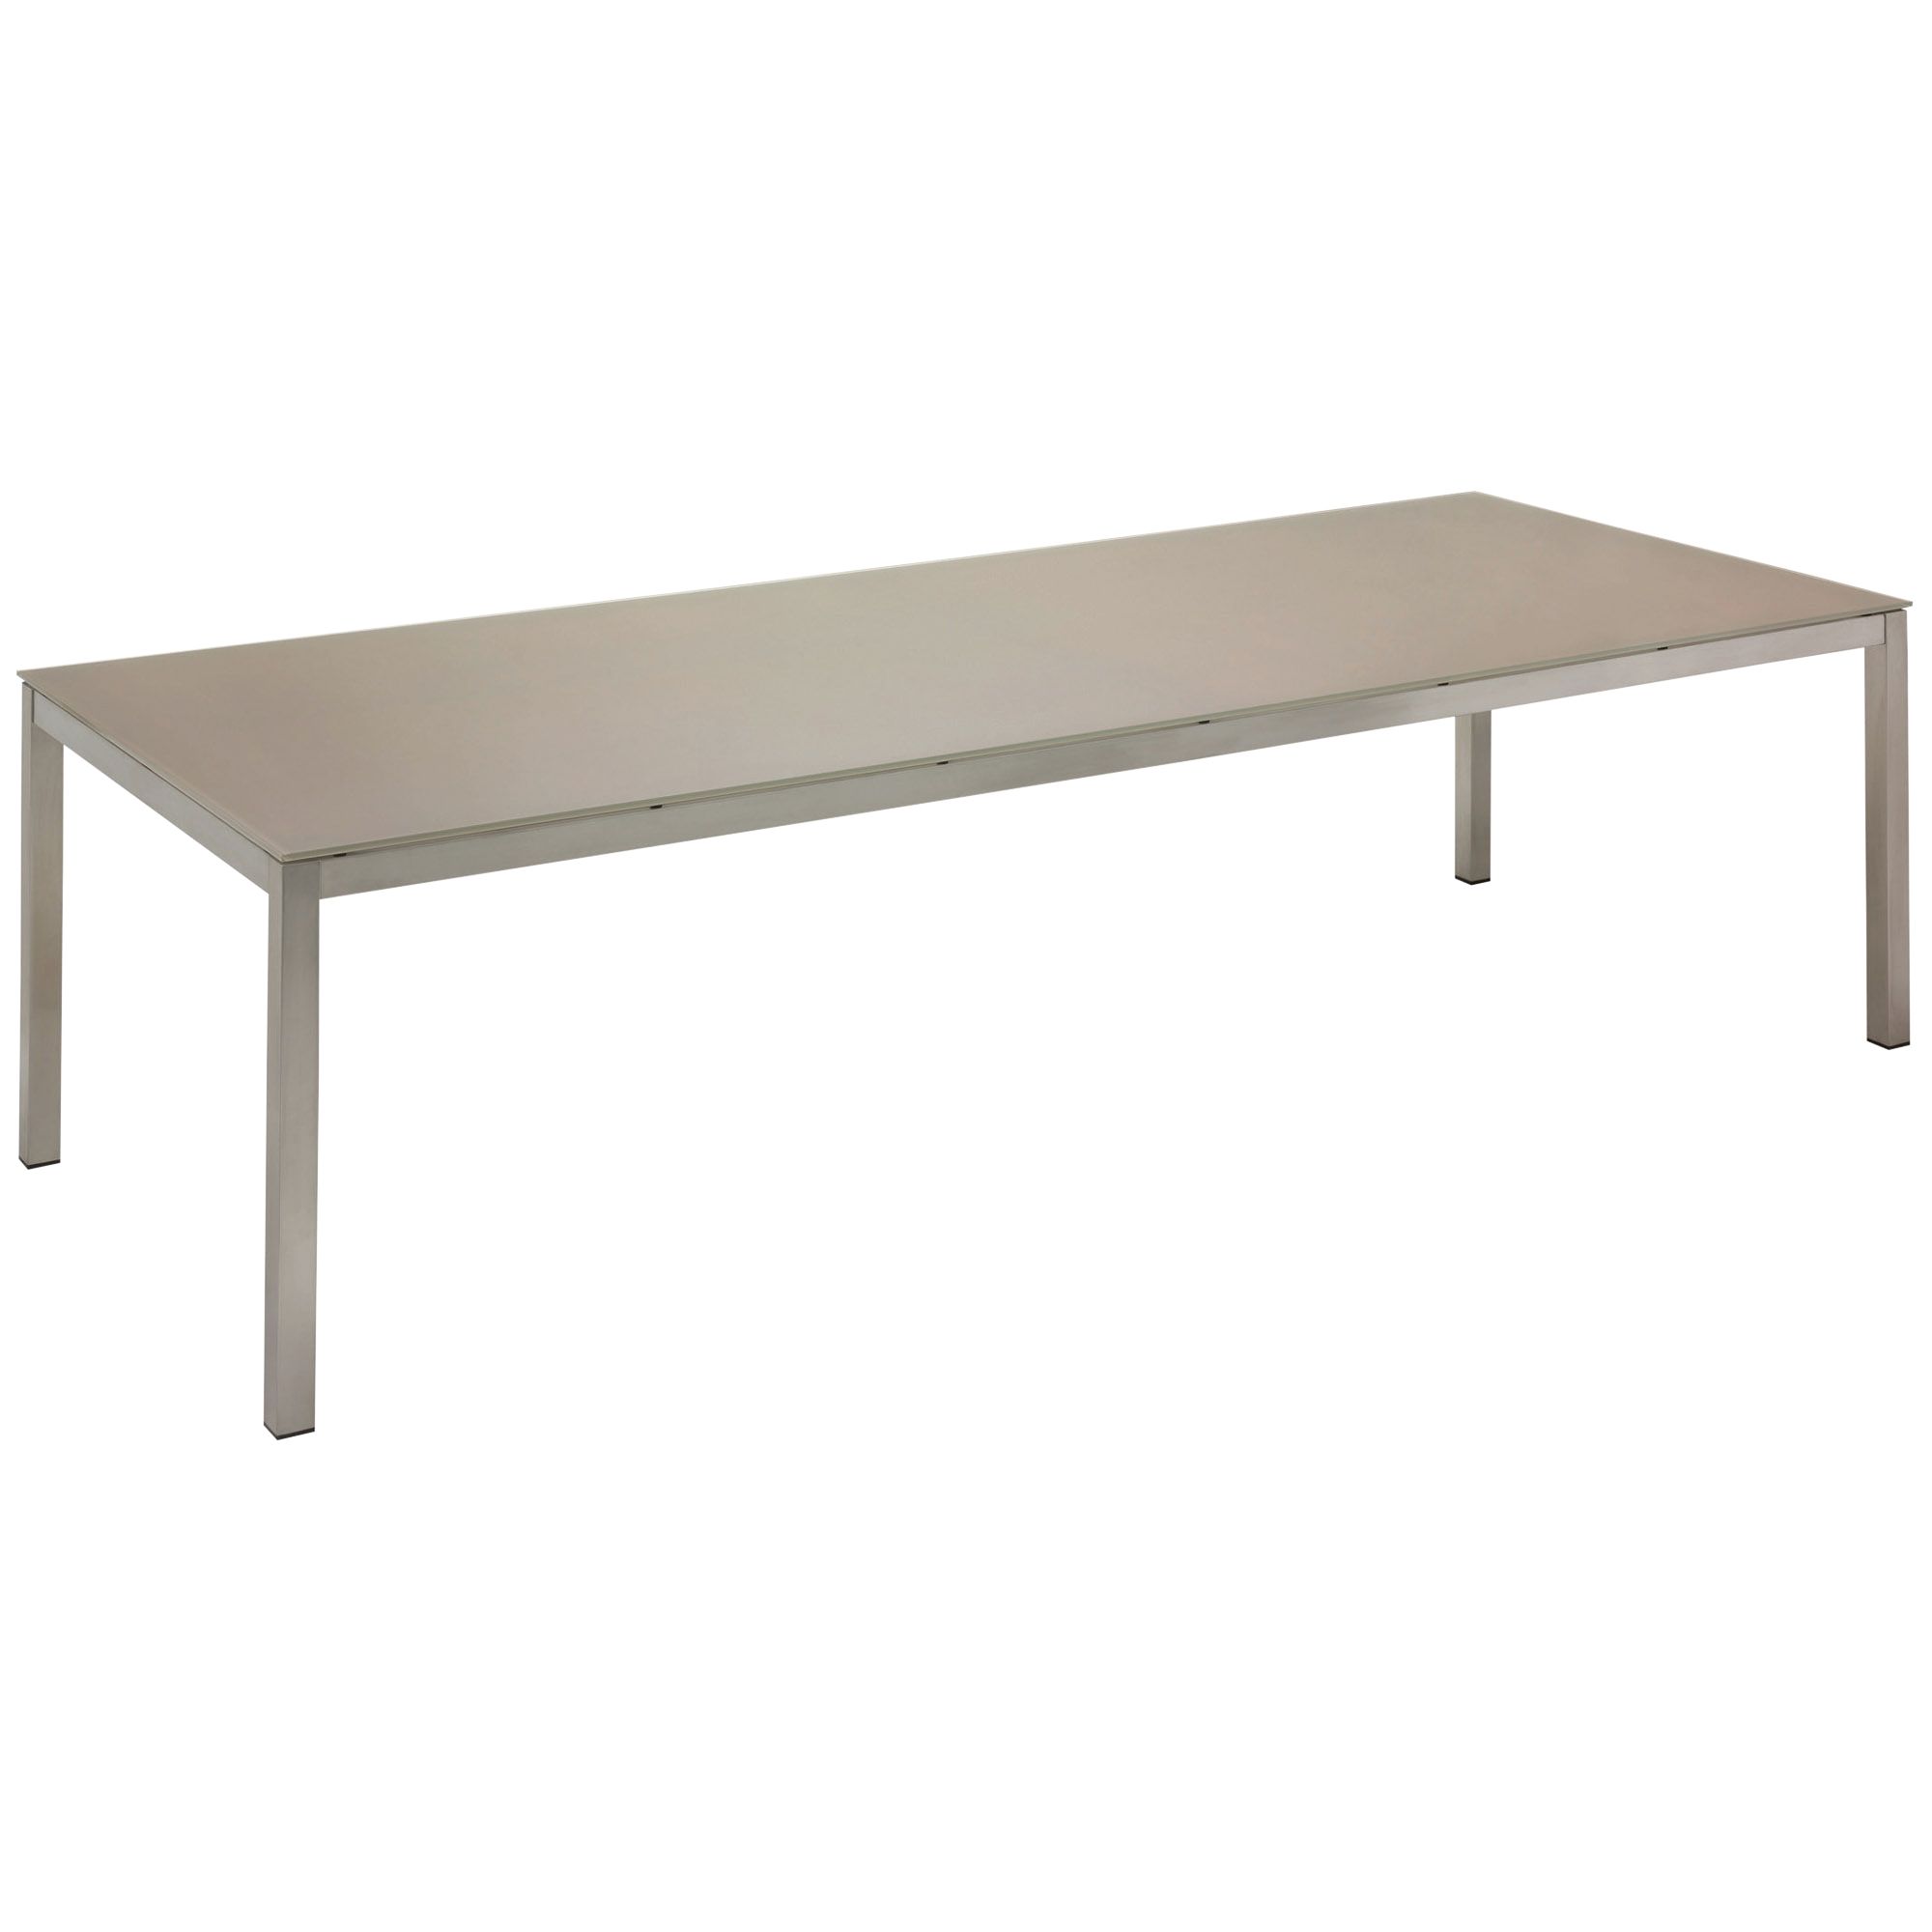 Gloster Kore Rectangular 10 Seater Outdoor Dining Table, Taupe Glass, width 280cm